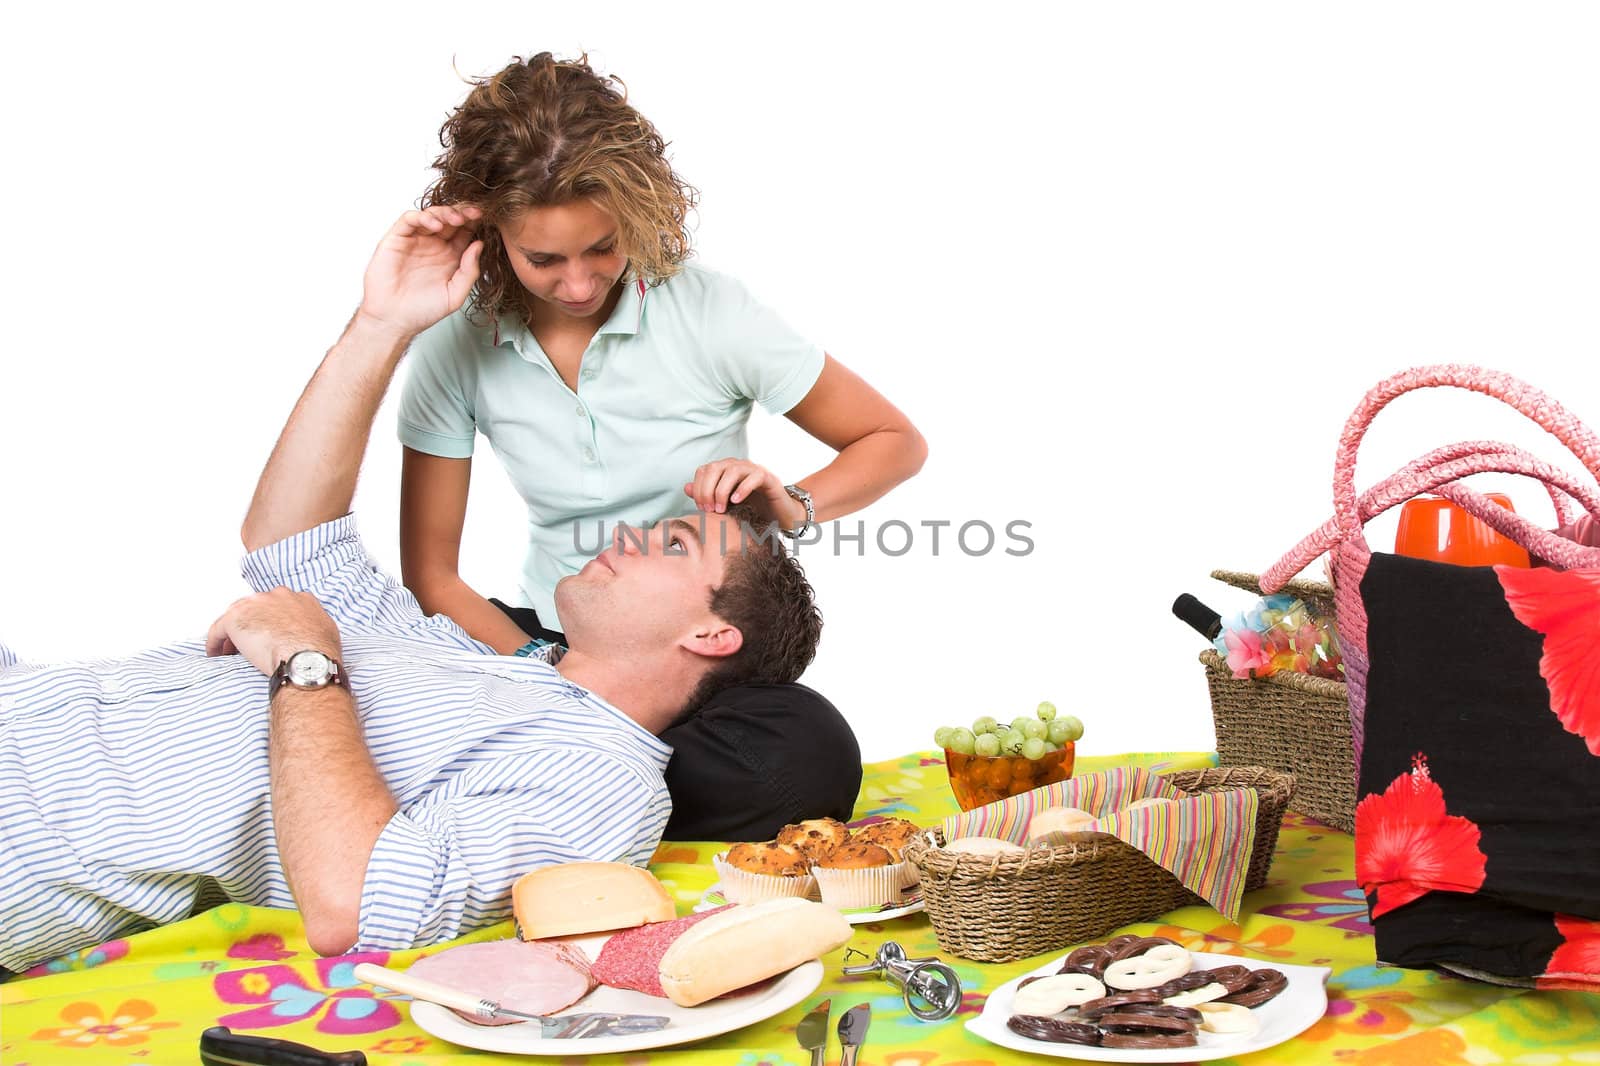 Sweet young couple together on a picnic, stroking eachother lovingly through the hair